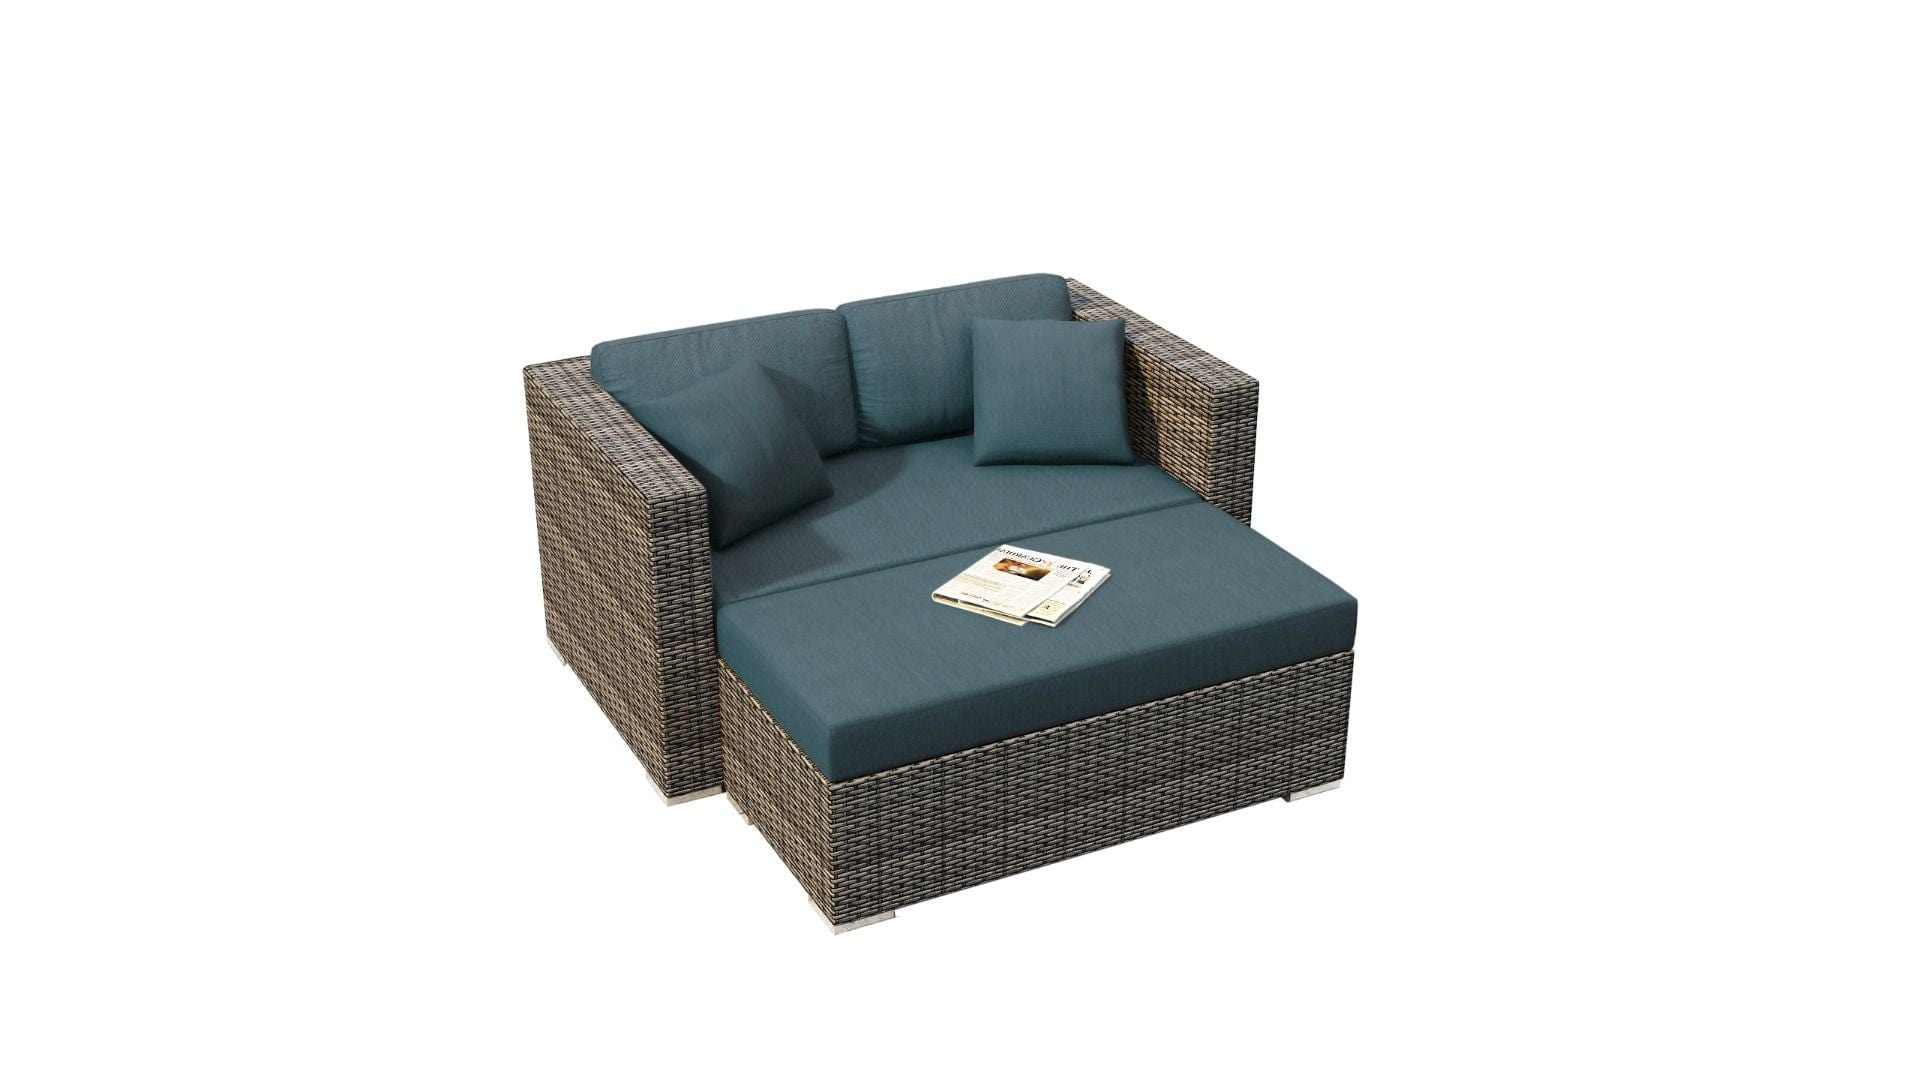 Harmonia Living Outdoor Furniture Harmonia Living - District Day Lounger | HL-DIS-TS-DL